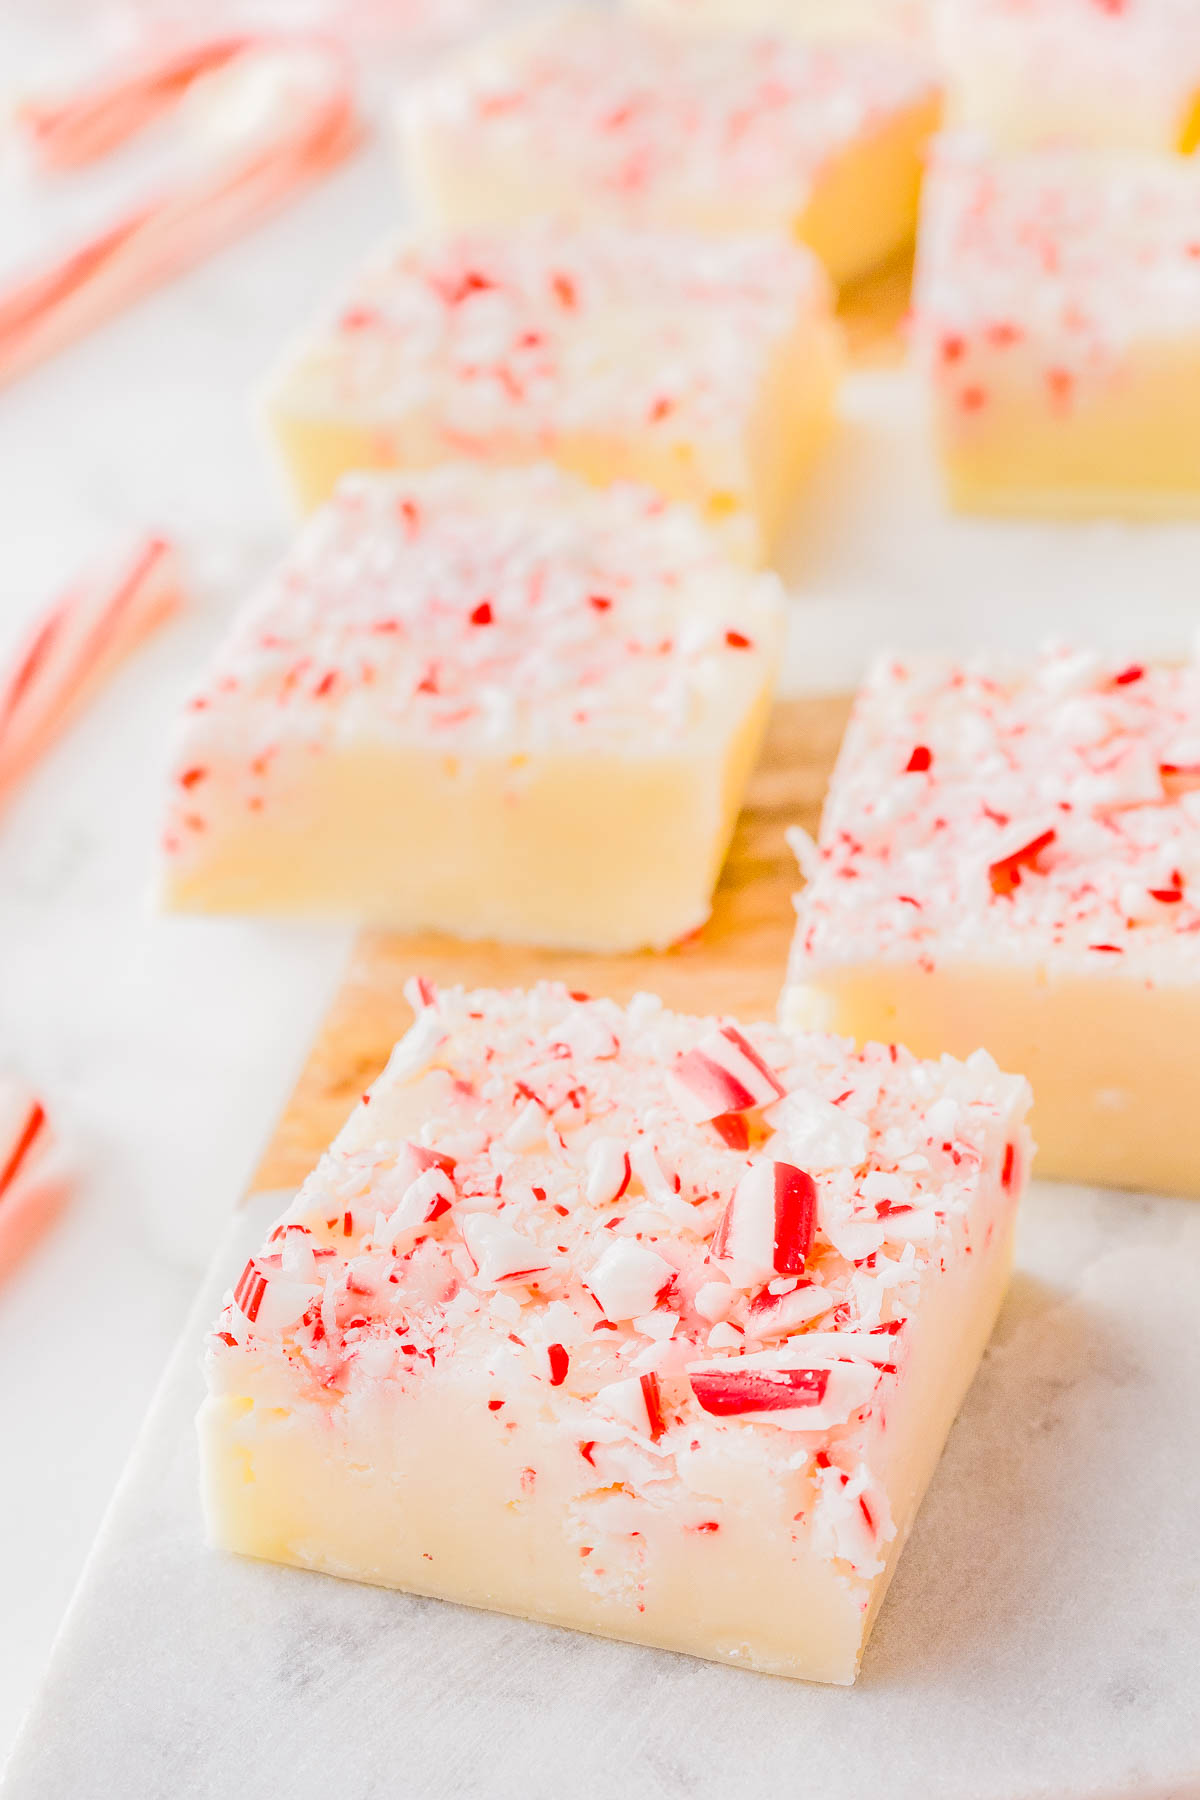 White Chocolate Peppermint Fudge - A FOOLPROOF recipe for fudge with no boiling, no candy thermometers, and it turns out PERFECTLY every time! This EASY recipe uses just 4 INGREDIENTS, can be made ahead of time, and is great for holiday entertaining! It's creamy and rich with a peppermint crunch, making it a wonderfully festive treat!